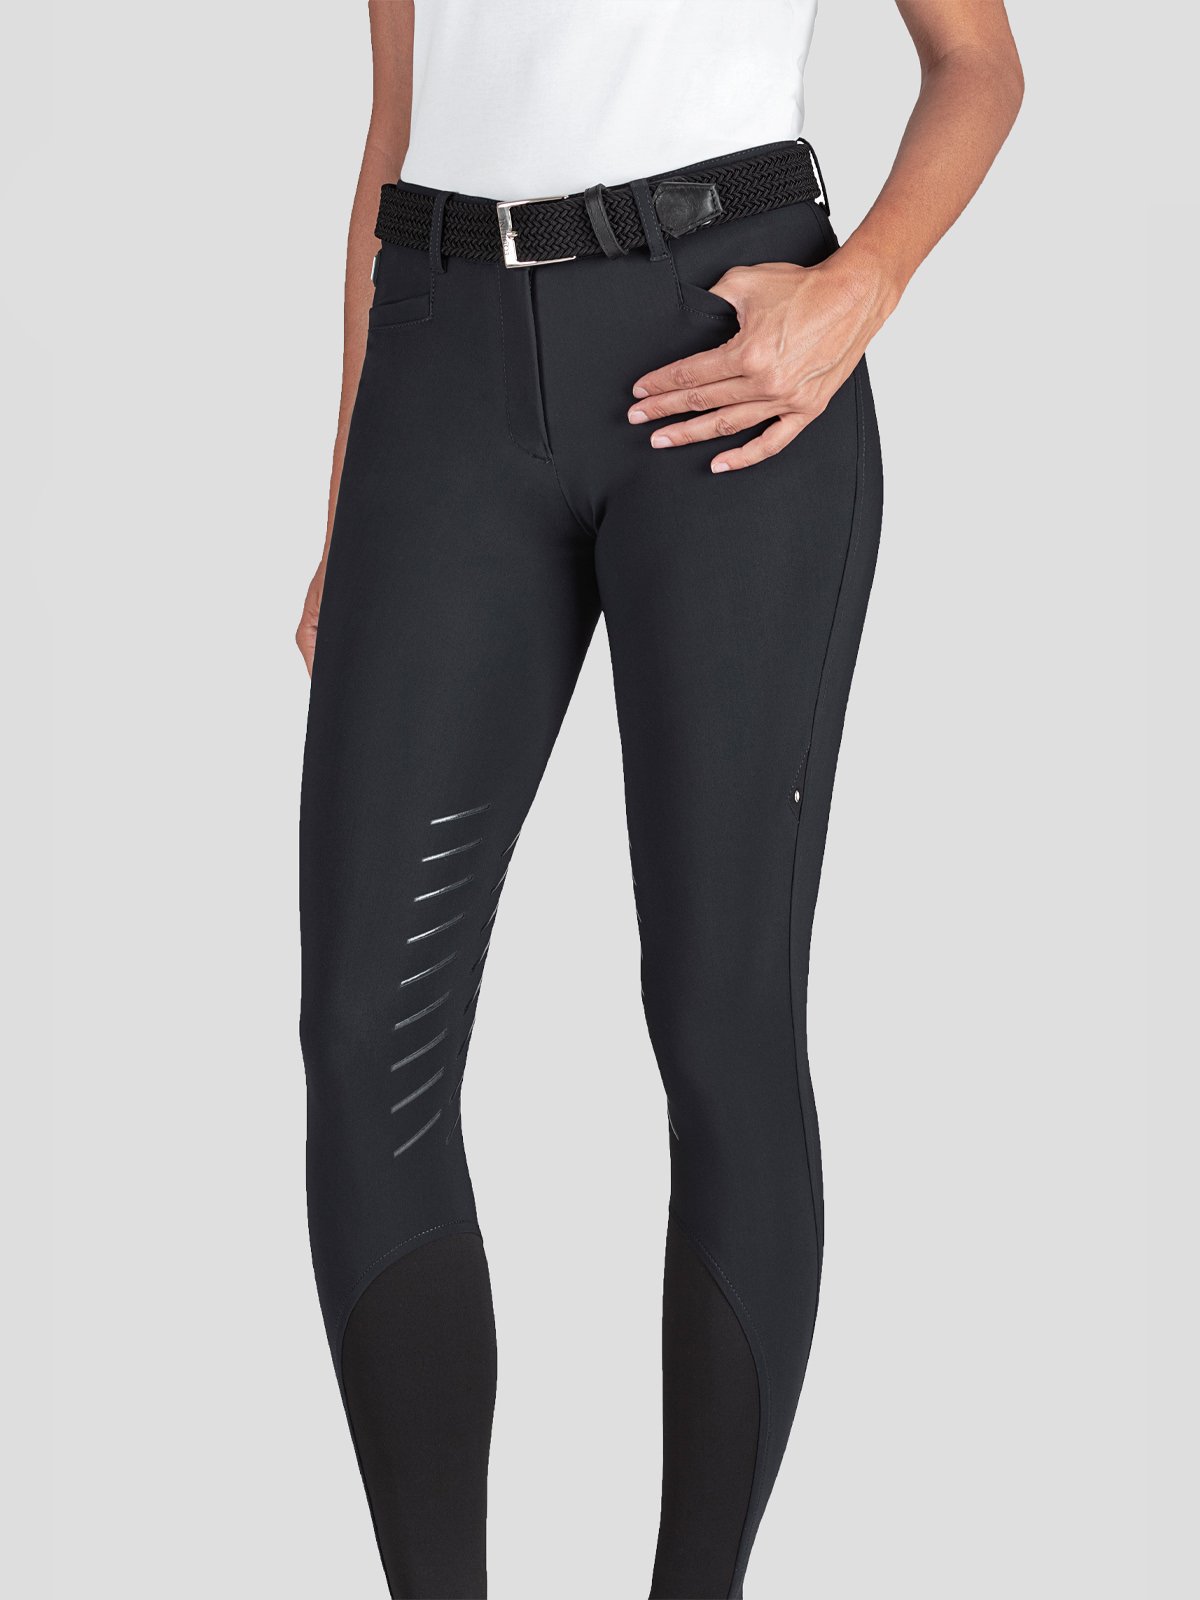 CATIRK SUMMER WEIGHT KNEE GRIP BREECHES - black color - front view